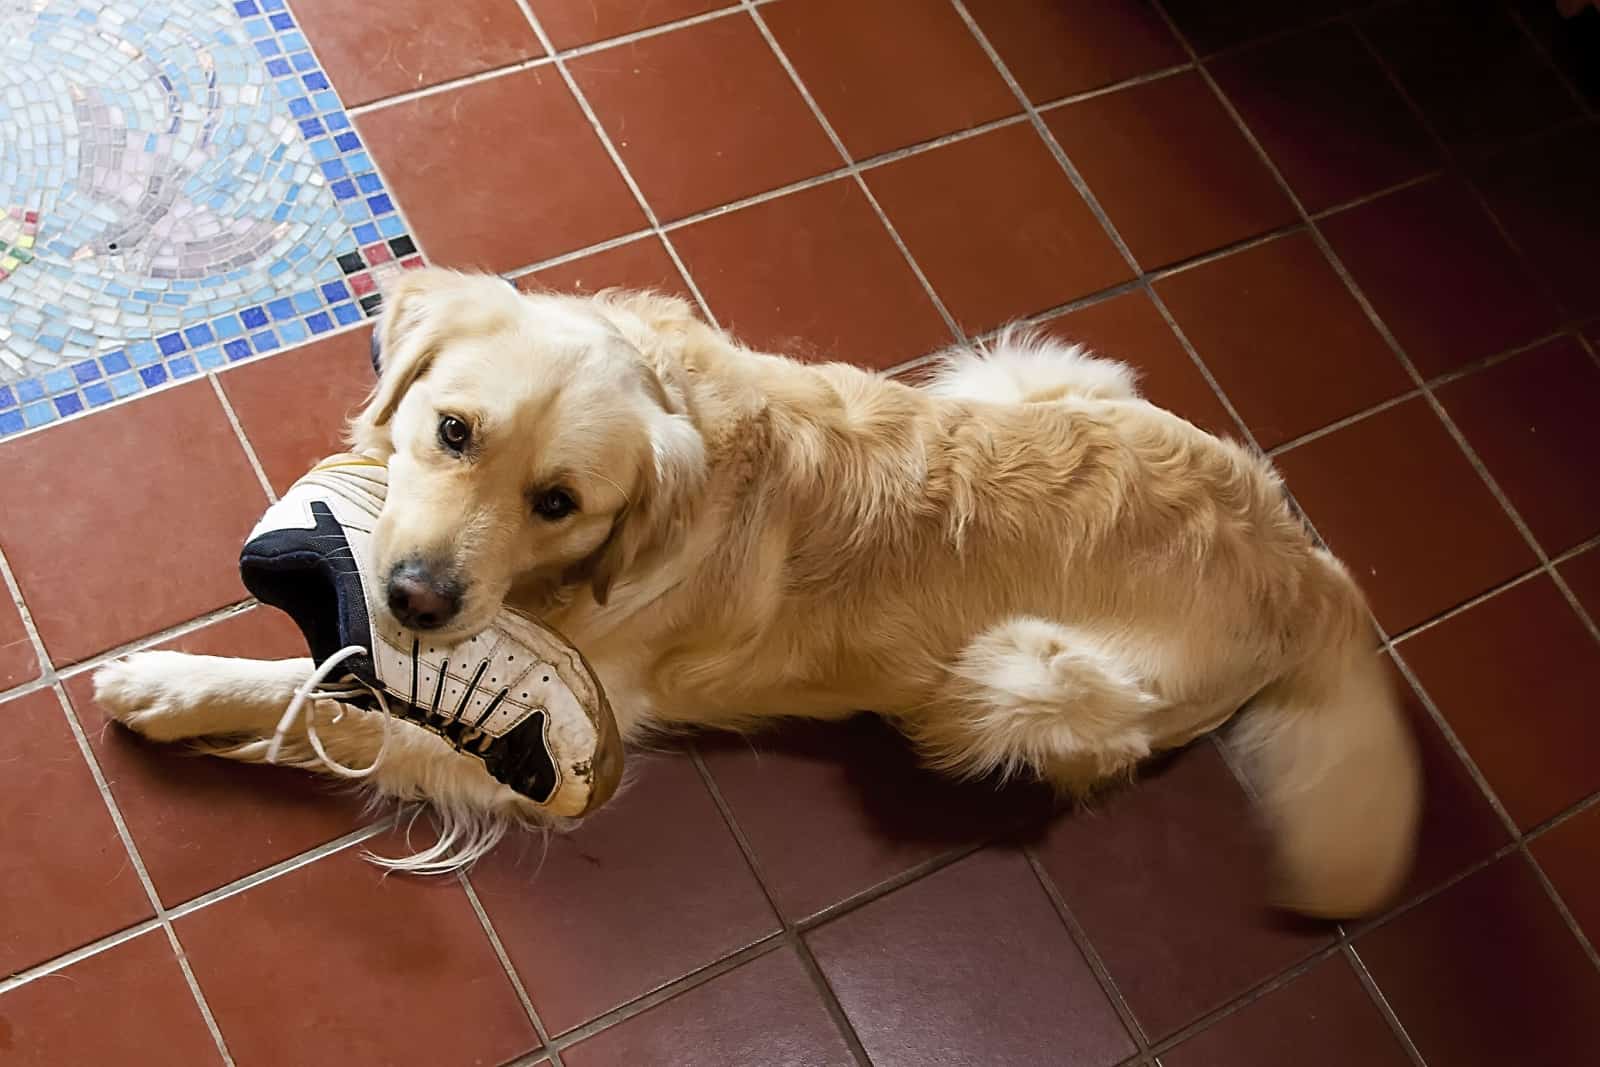 An overhead shot of a golden retriever holding a boot in its mouth